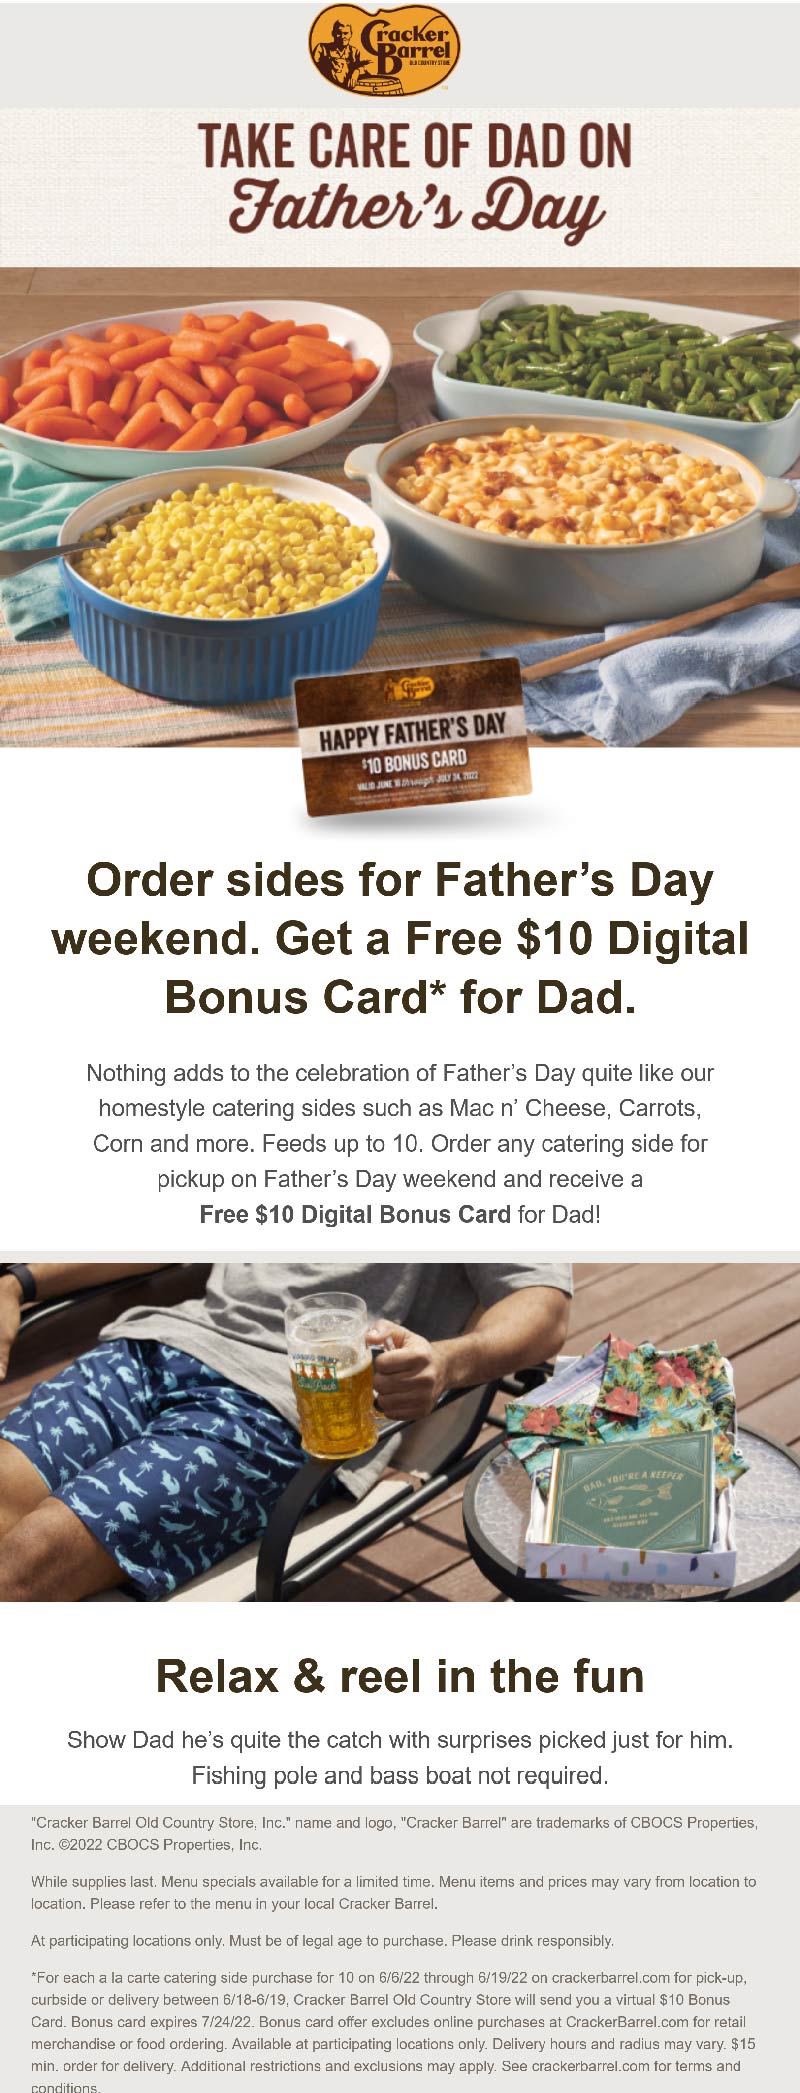 Cracker Barrel restaurants Coupon  Free $10 card on each Fathers Day catering-size side item at Cracker Barrel Old Country Store restaurants #crackerbarrel 